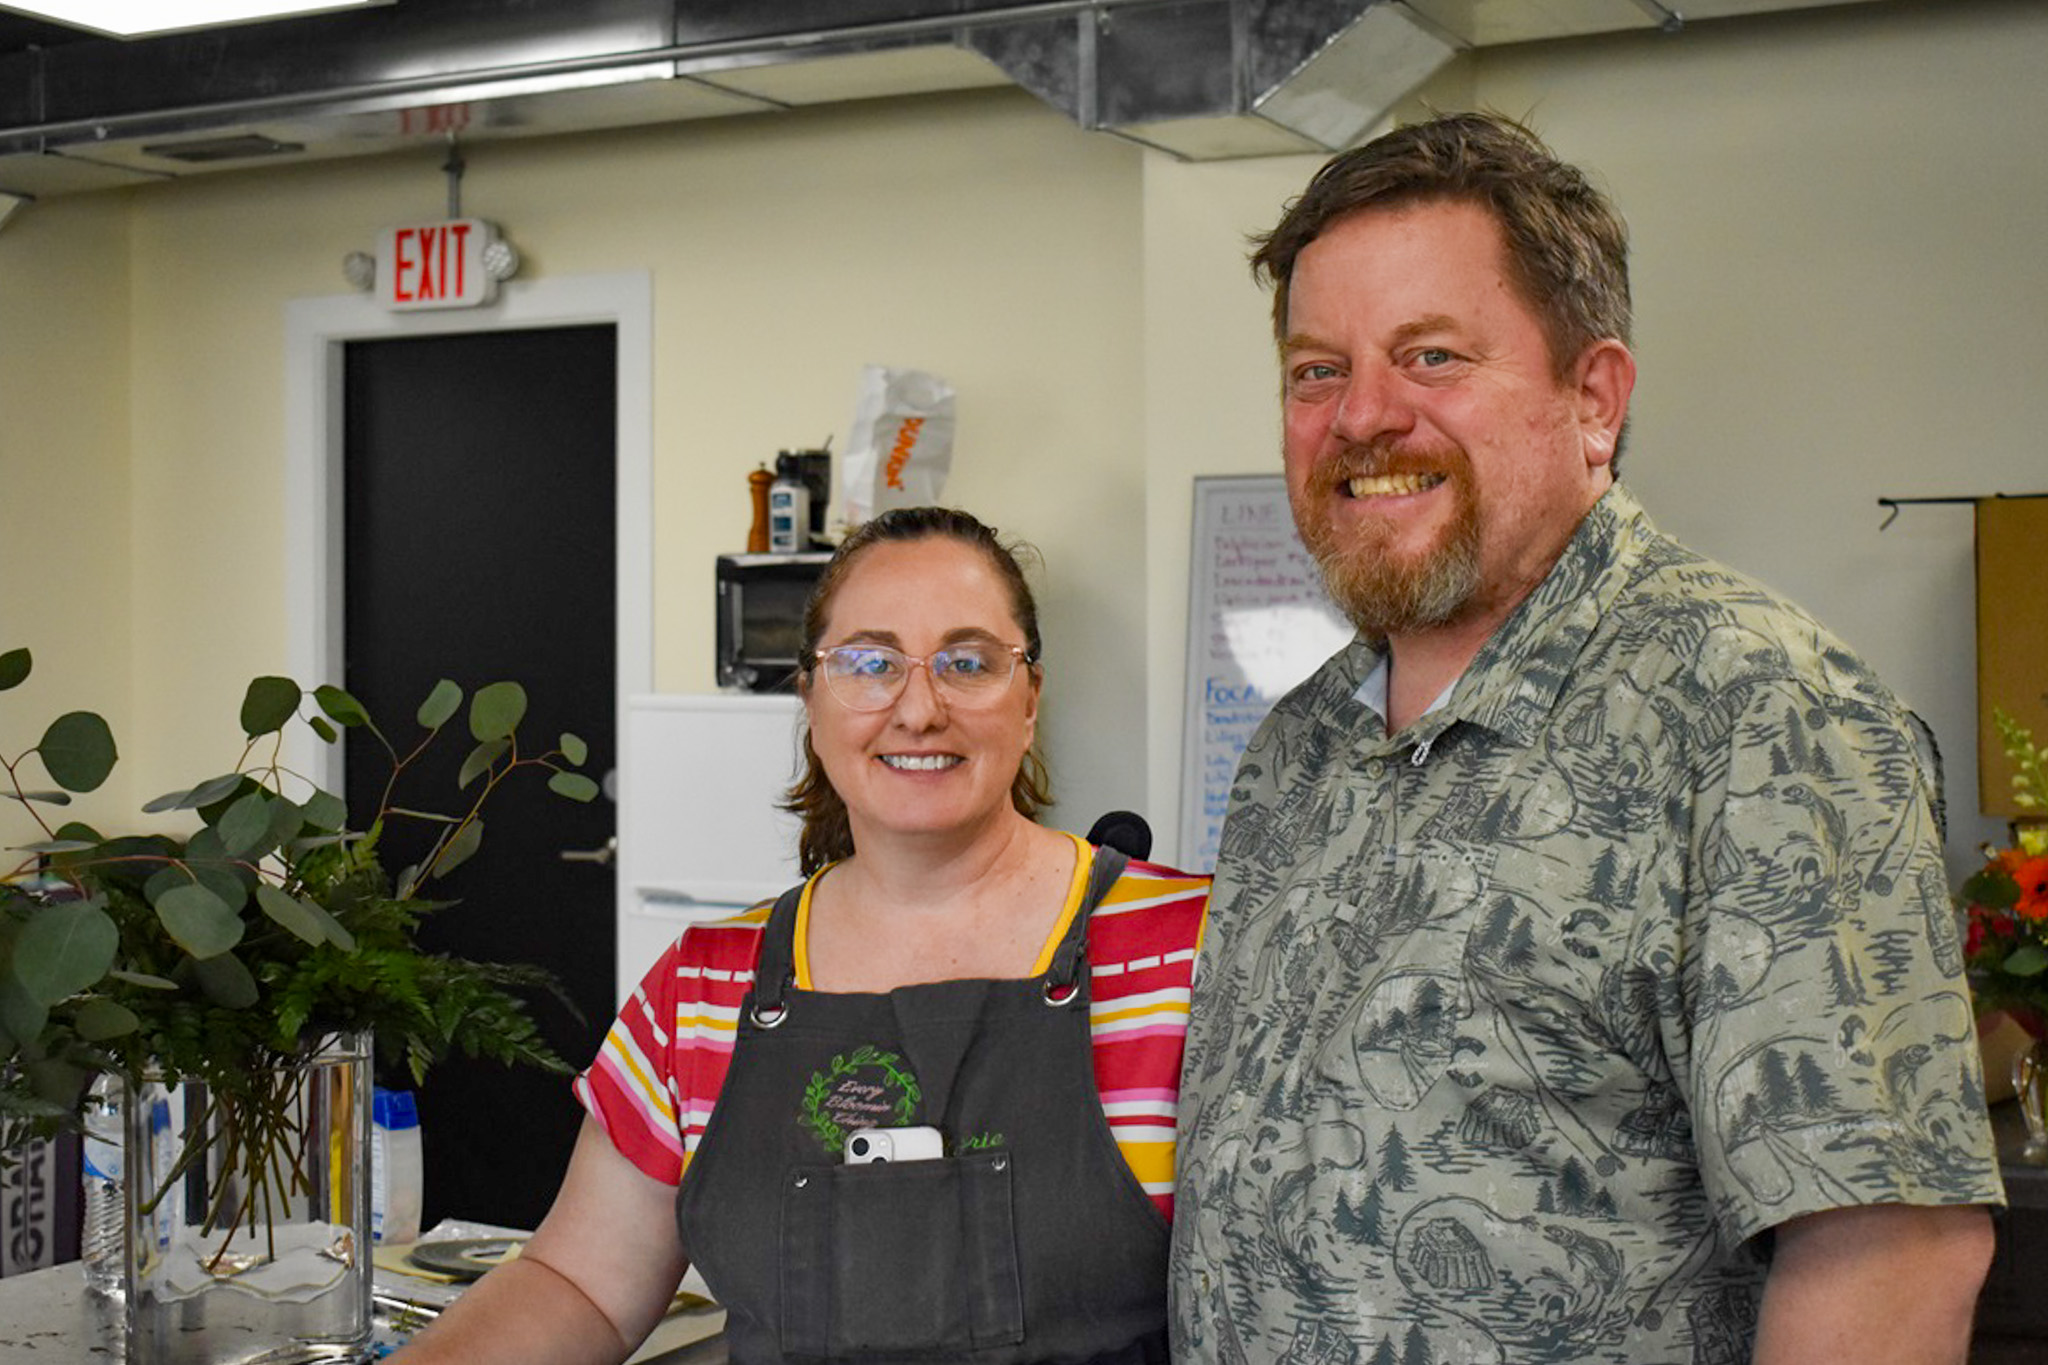 Owners of Every Bloomin' Thing, Kerrie and Zach Buettner. CREDIT ANNIE SMITH BARKALOW